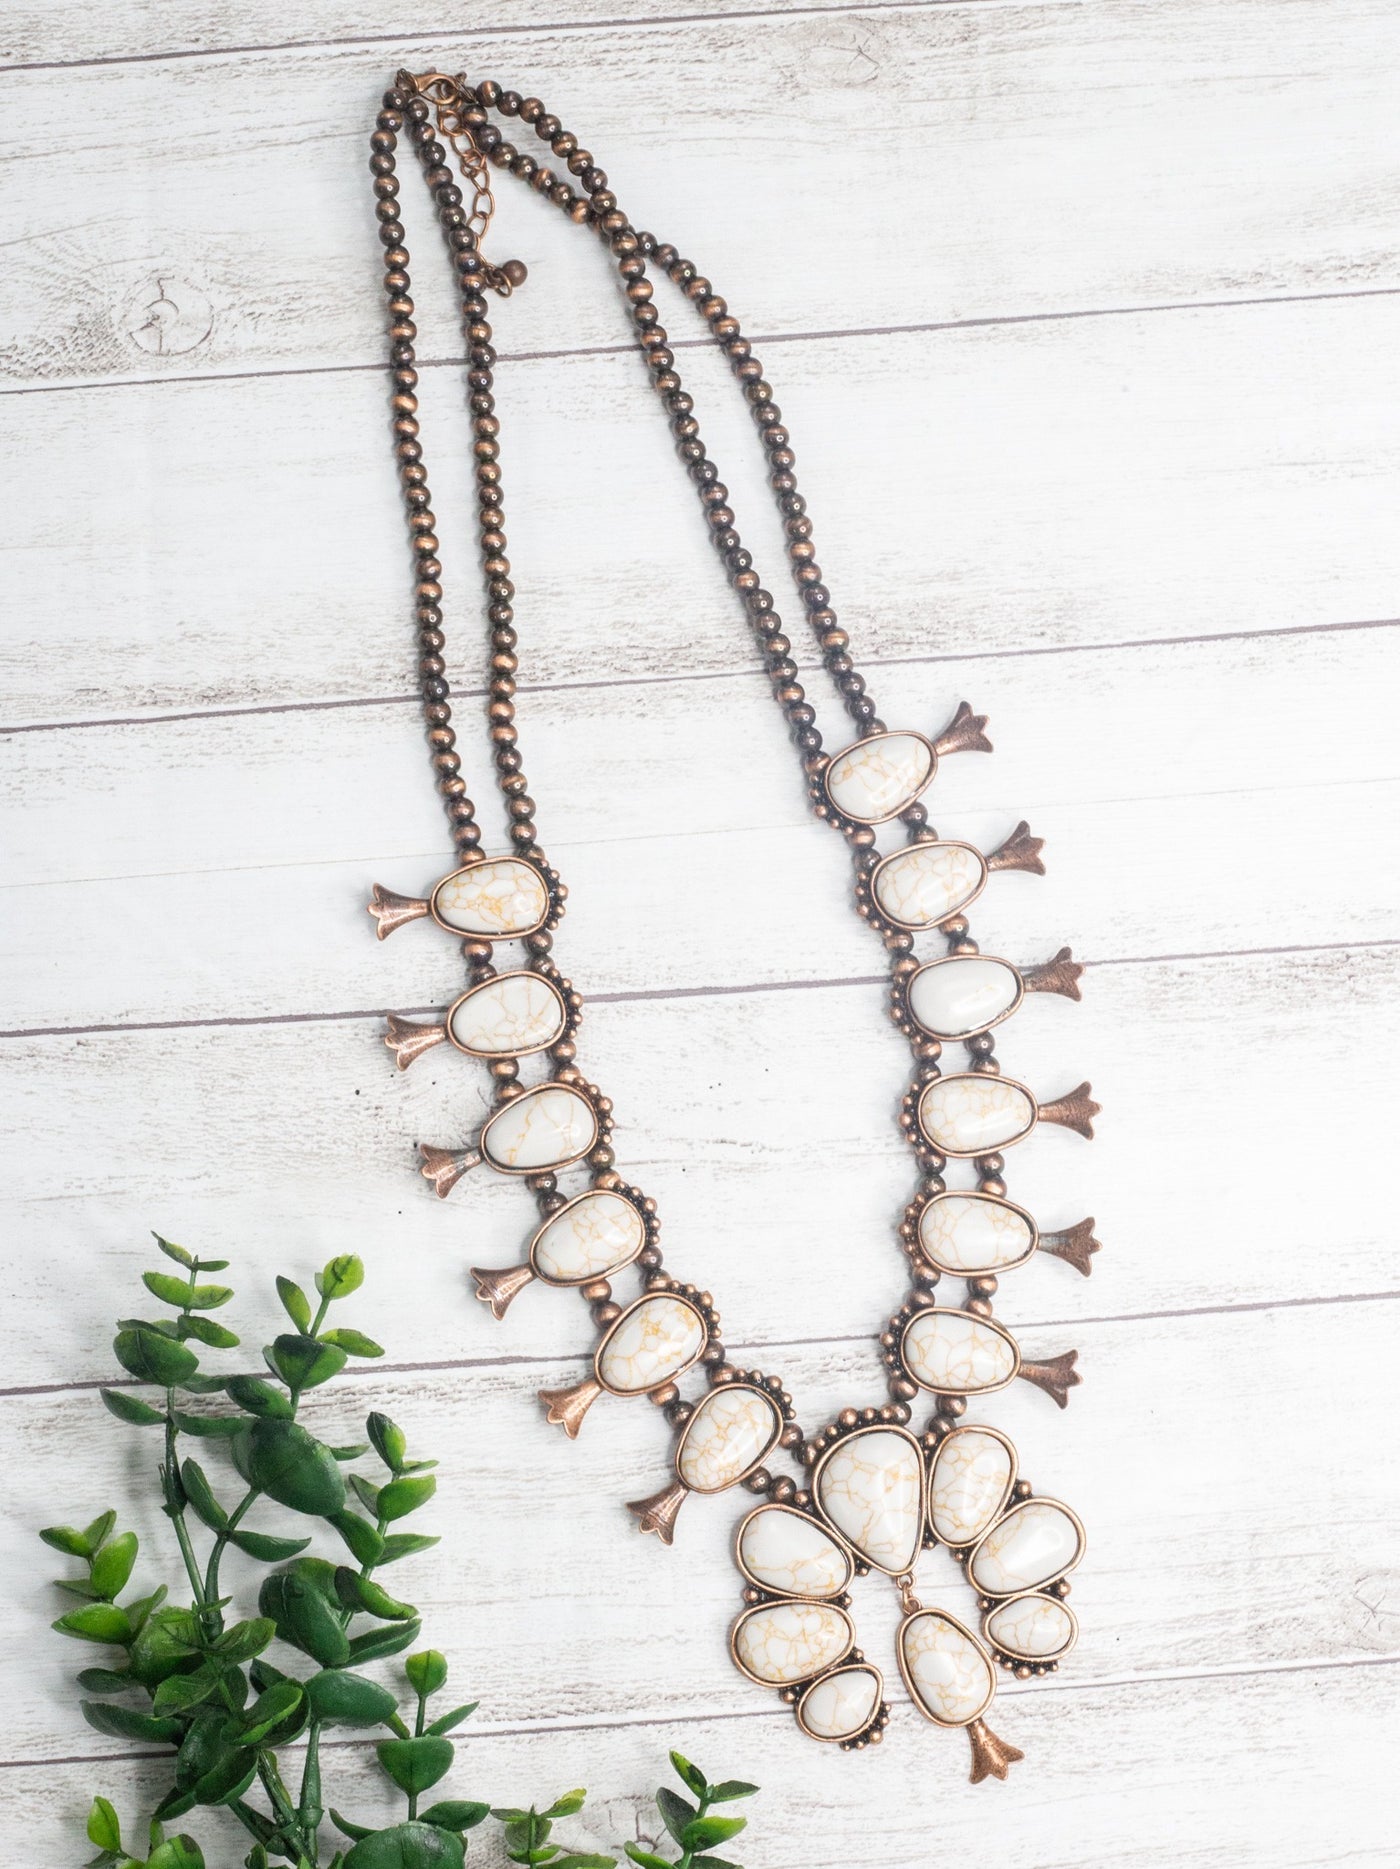 She Can't Be Tamed White Howlite Copper Squash Blossom Navajo Pearl Necklace